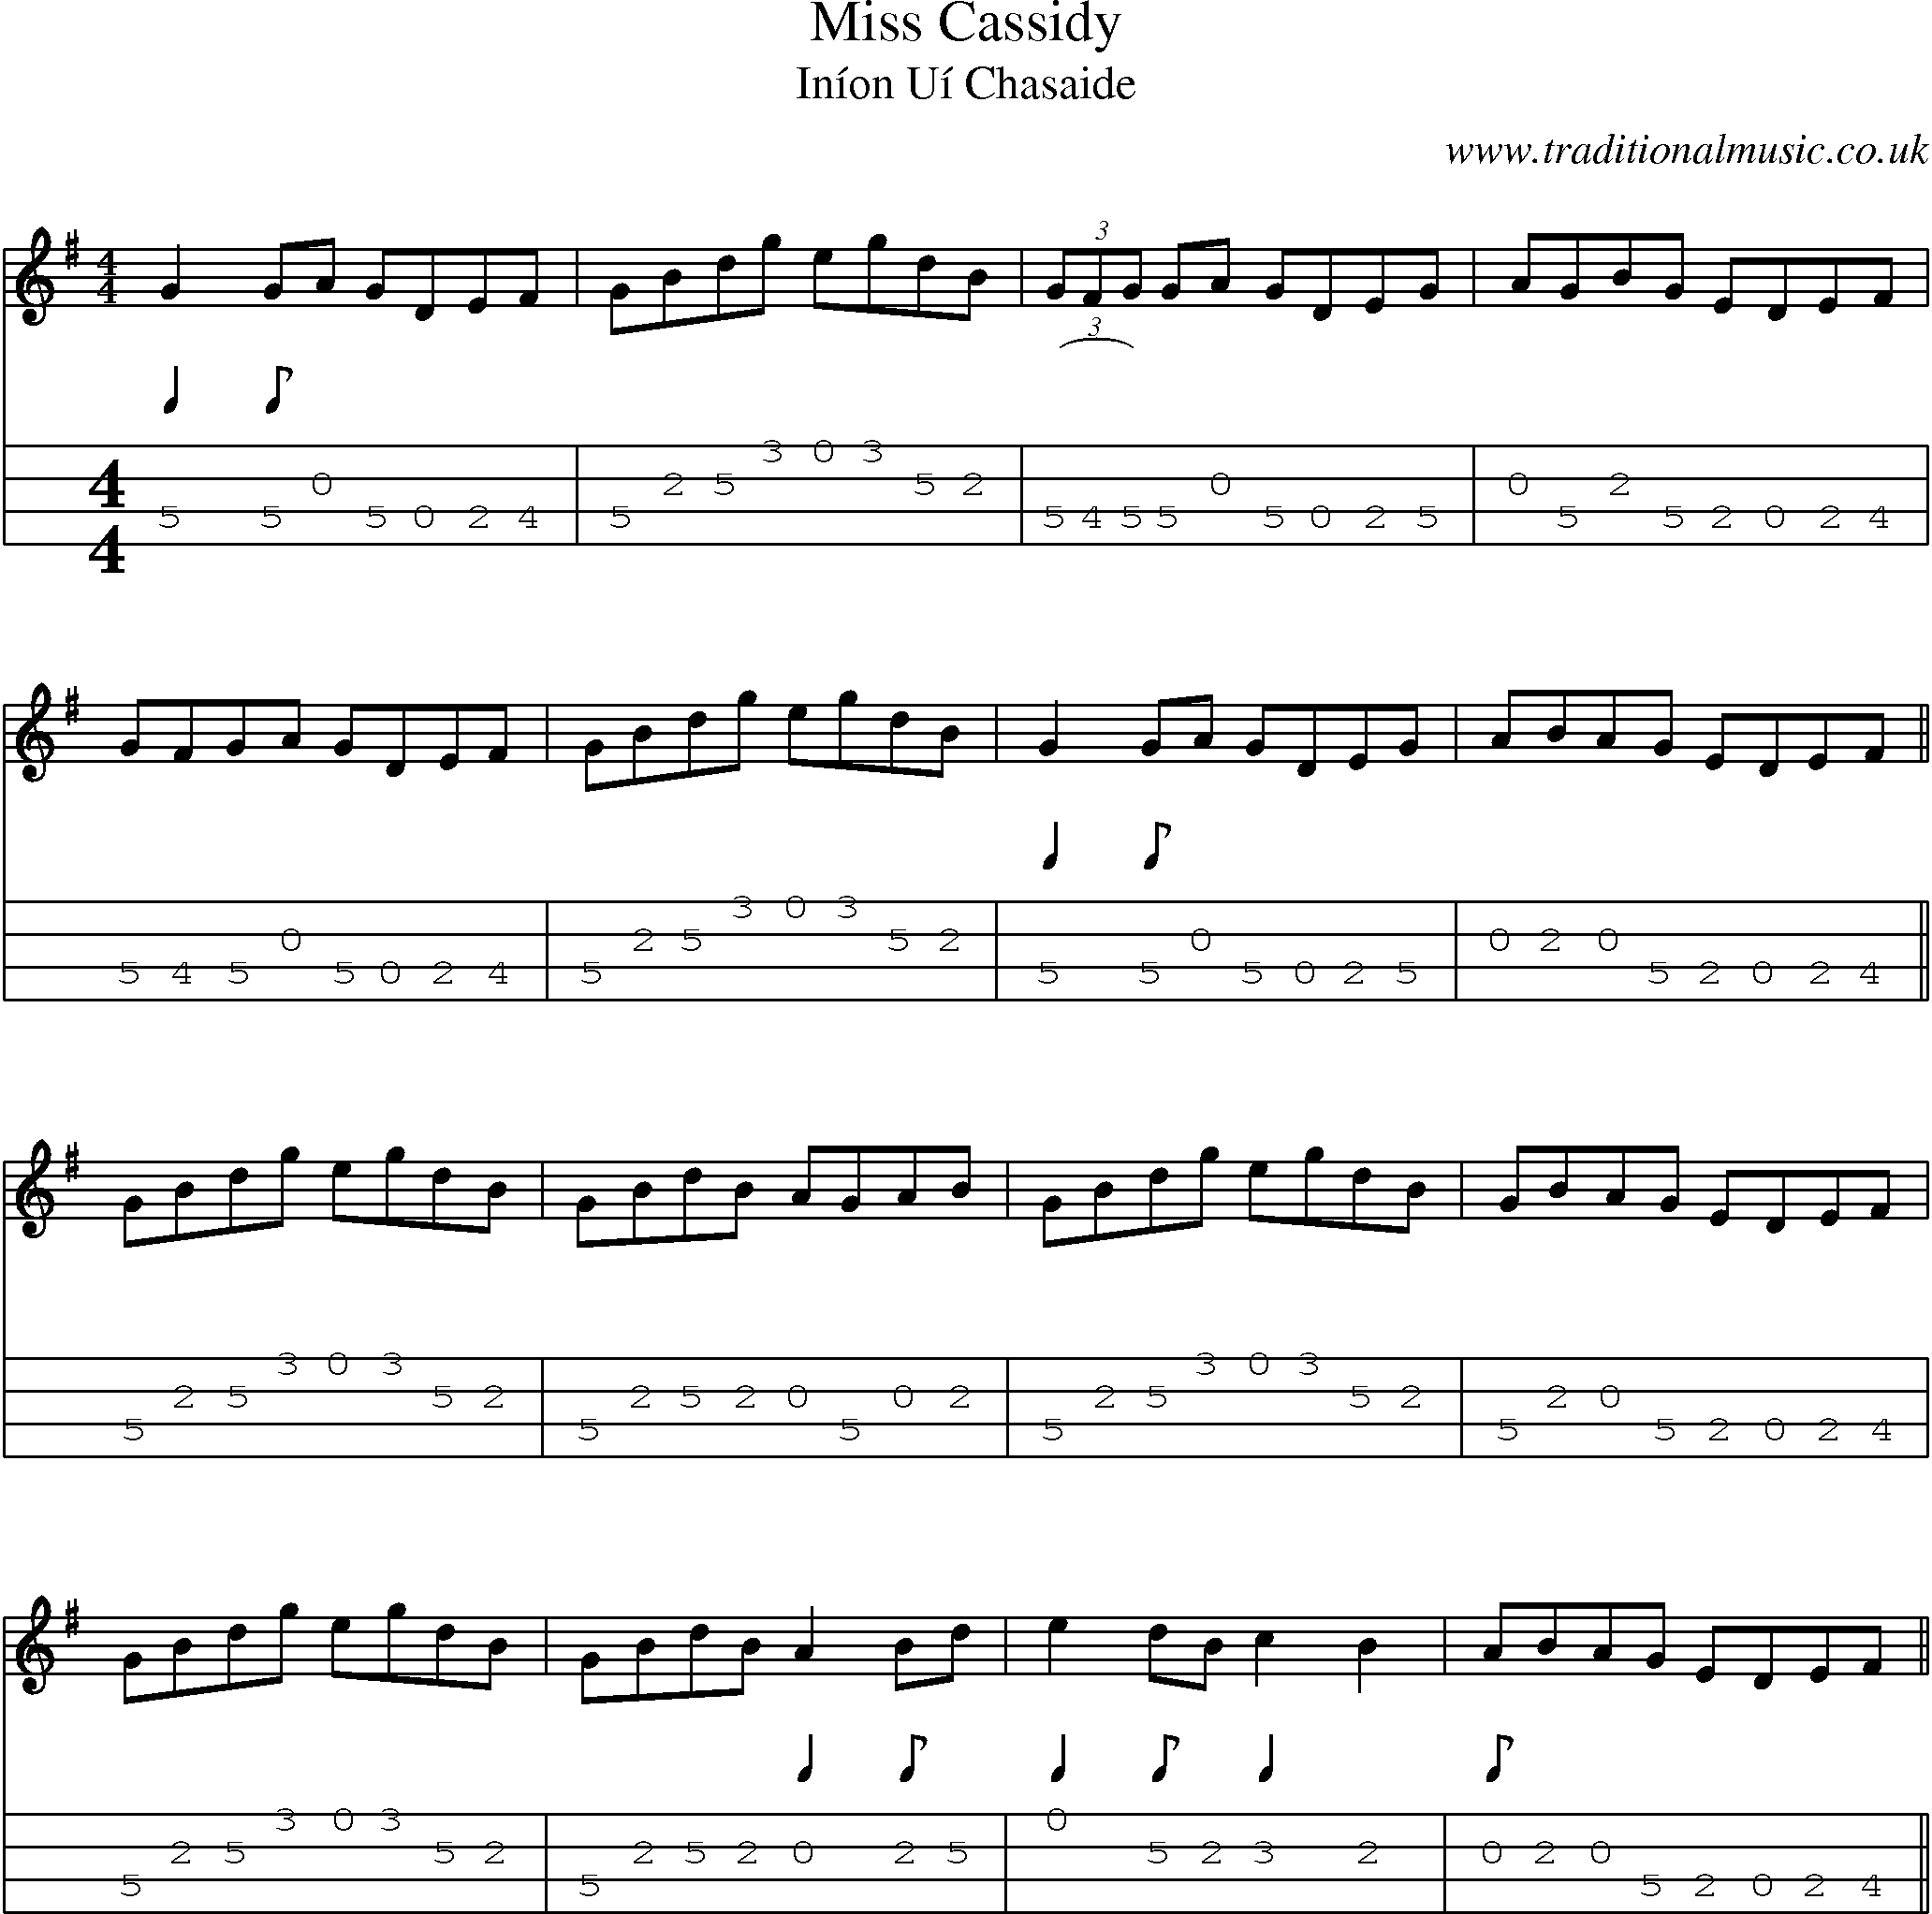 Music Score and Mandolin Tabs for Miss Cassidy